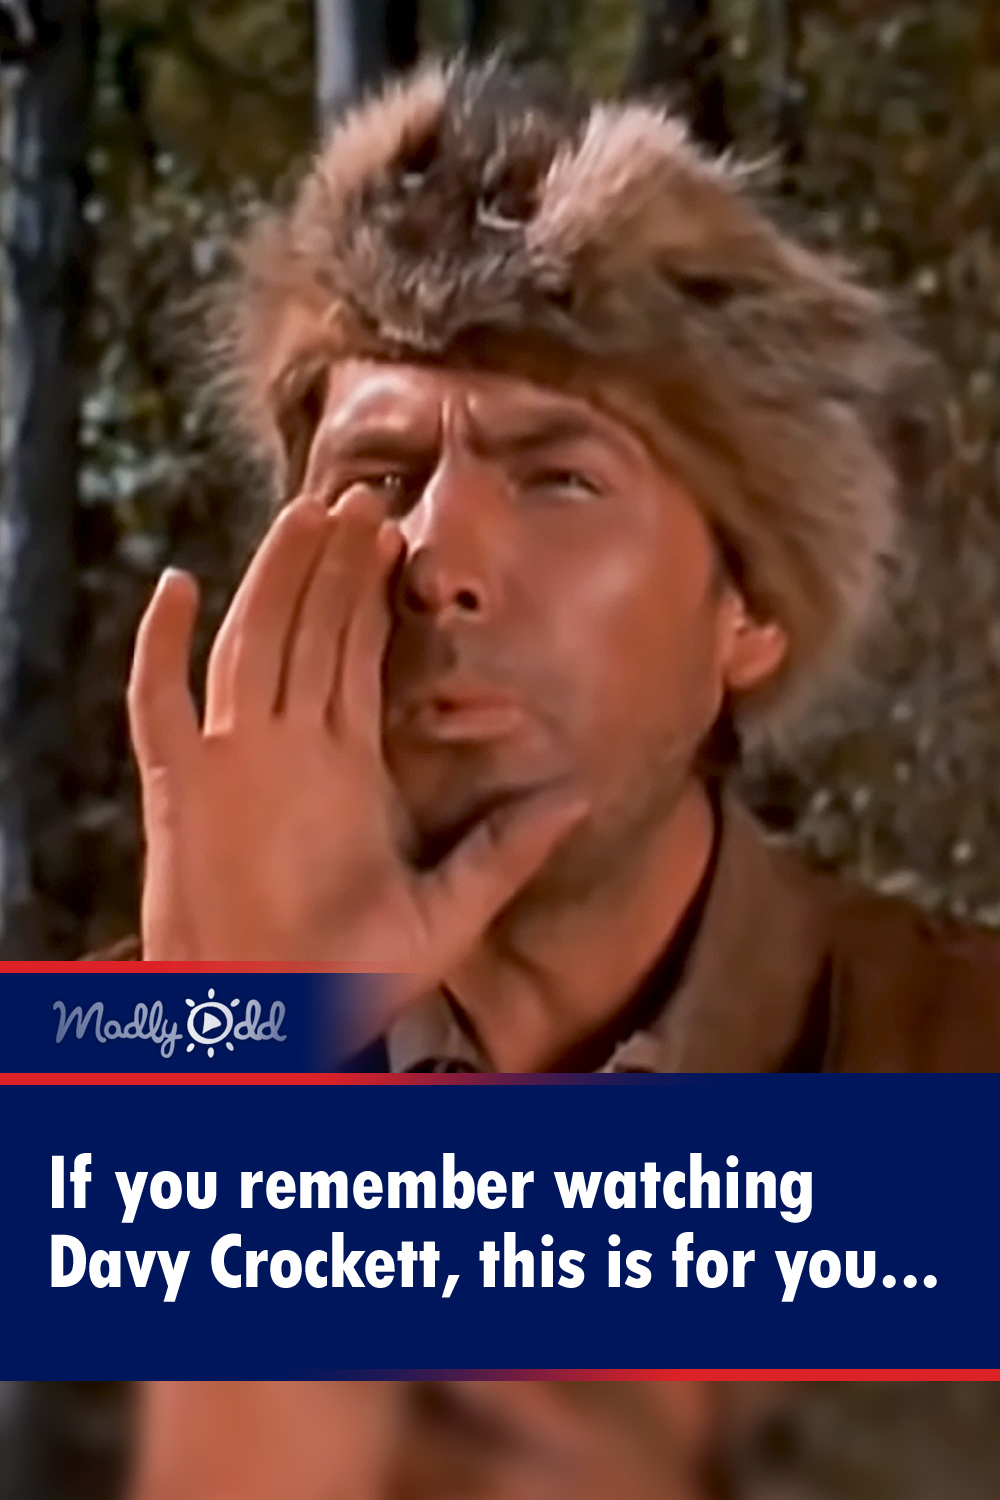 If you remember watching Davy Crockett, this is for you...